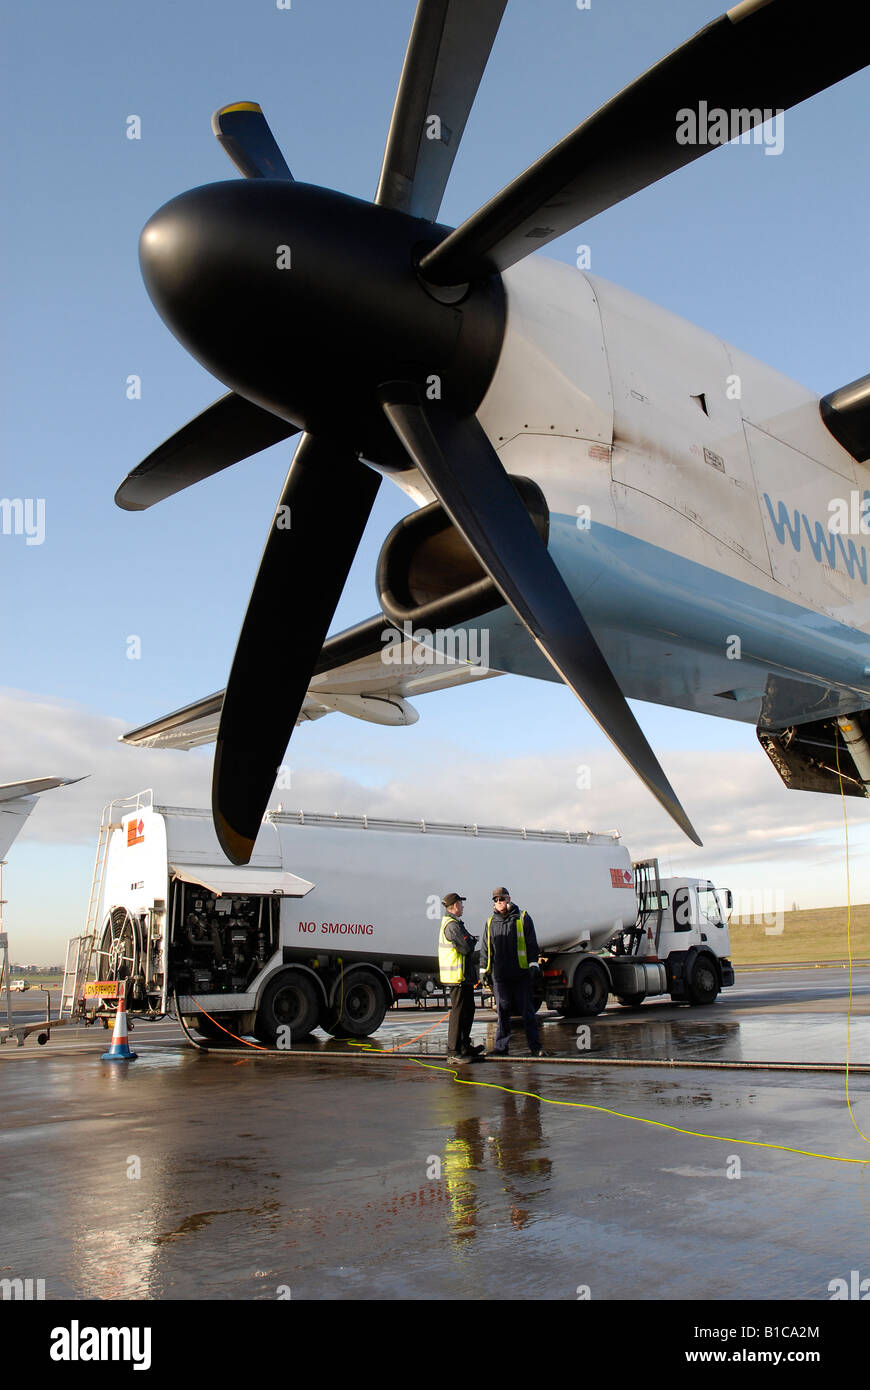 Aircraft refuelling with tanker at airport Stock Photo